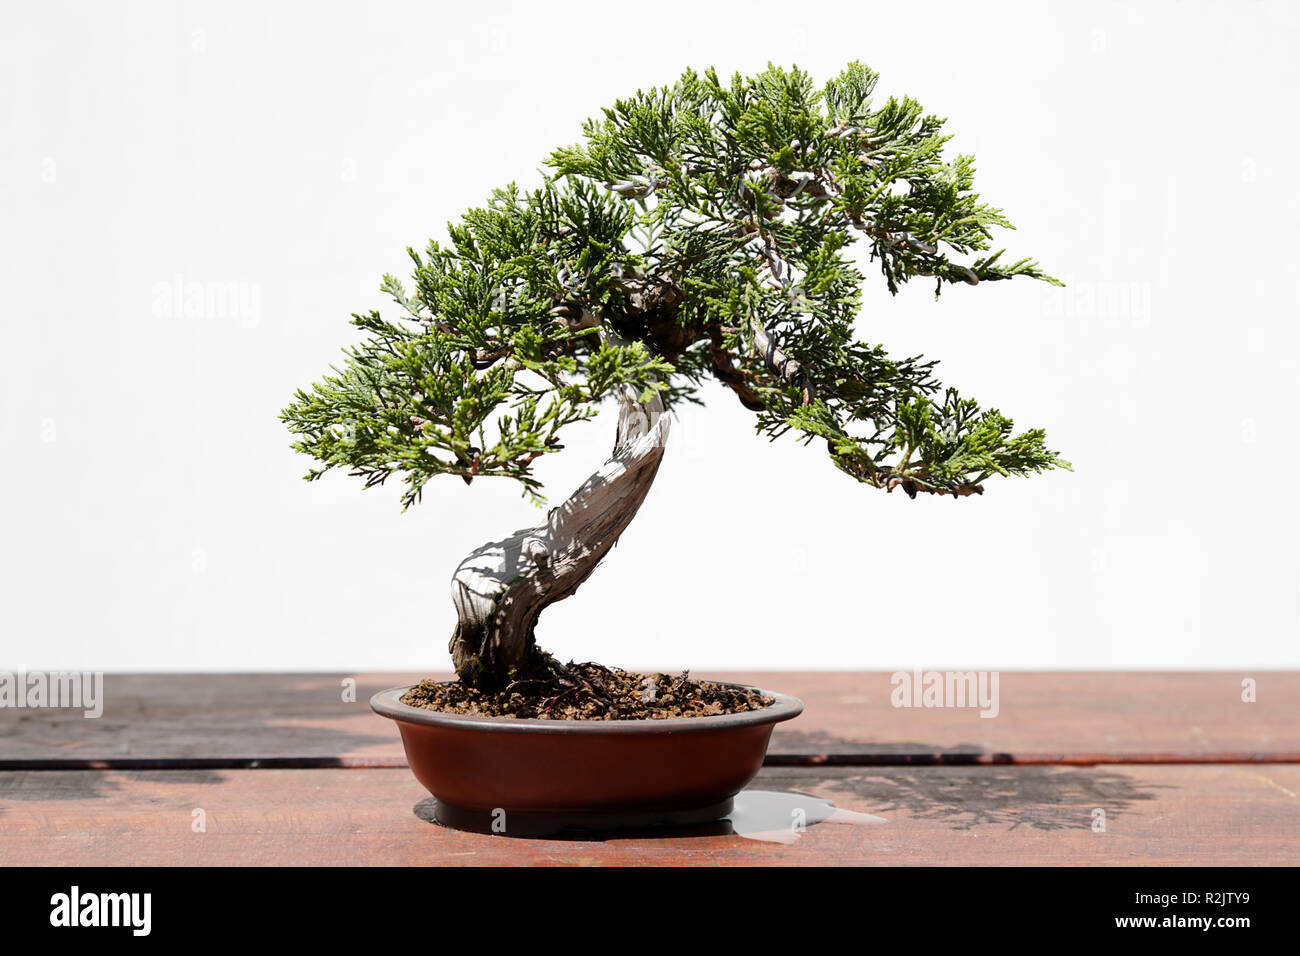 Juniperus sabina bonsai on a wooden table and white background Stock Photo